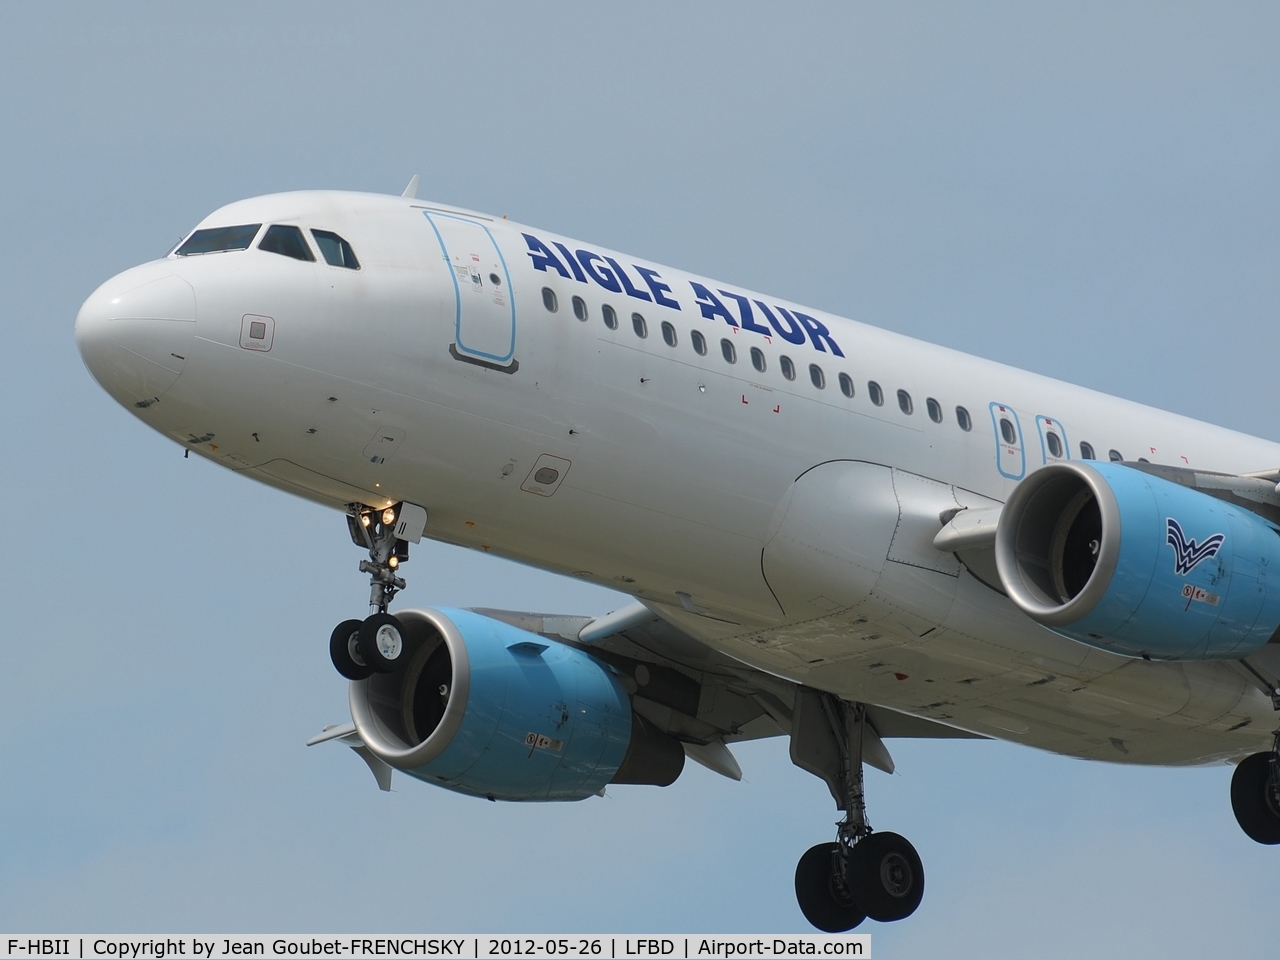 F-HBII, 2009 Airbus A320-214 C/N 3852, ZI738 from Alger landing 23